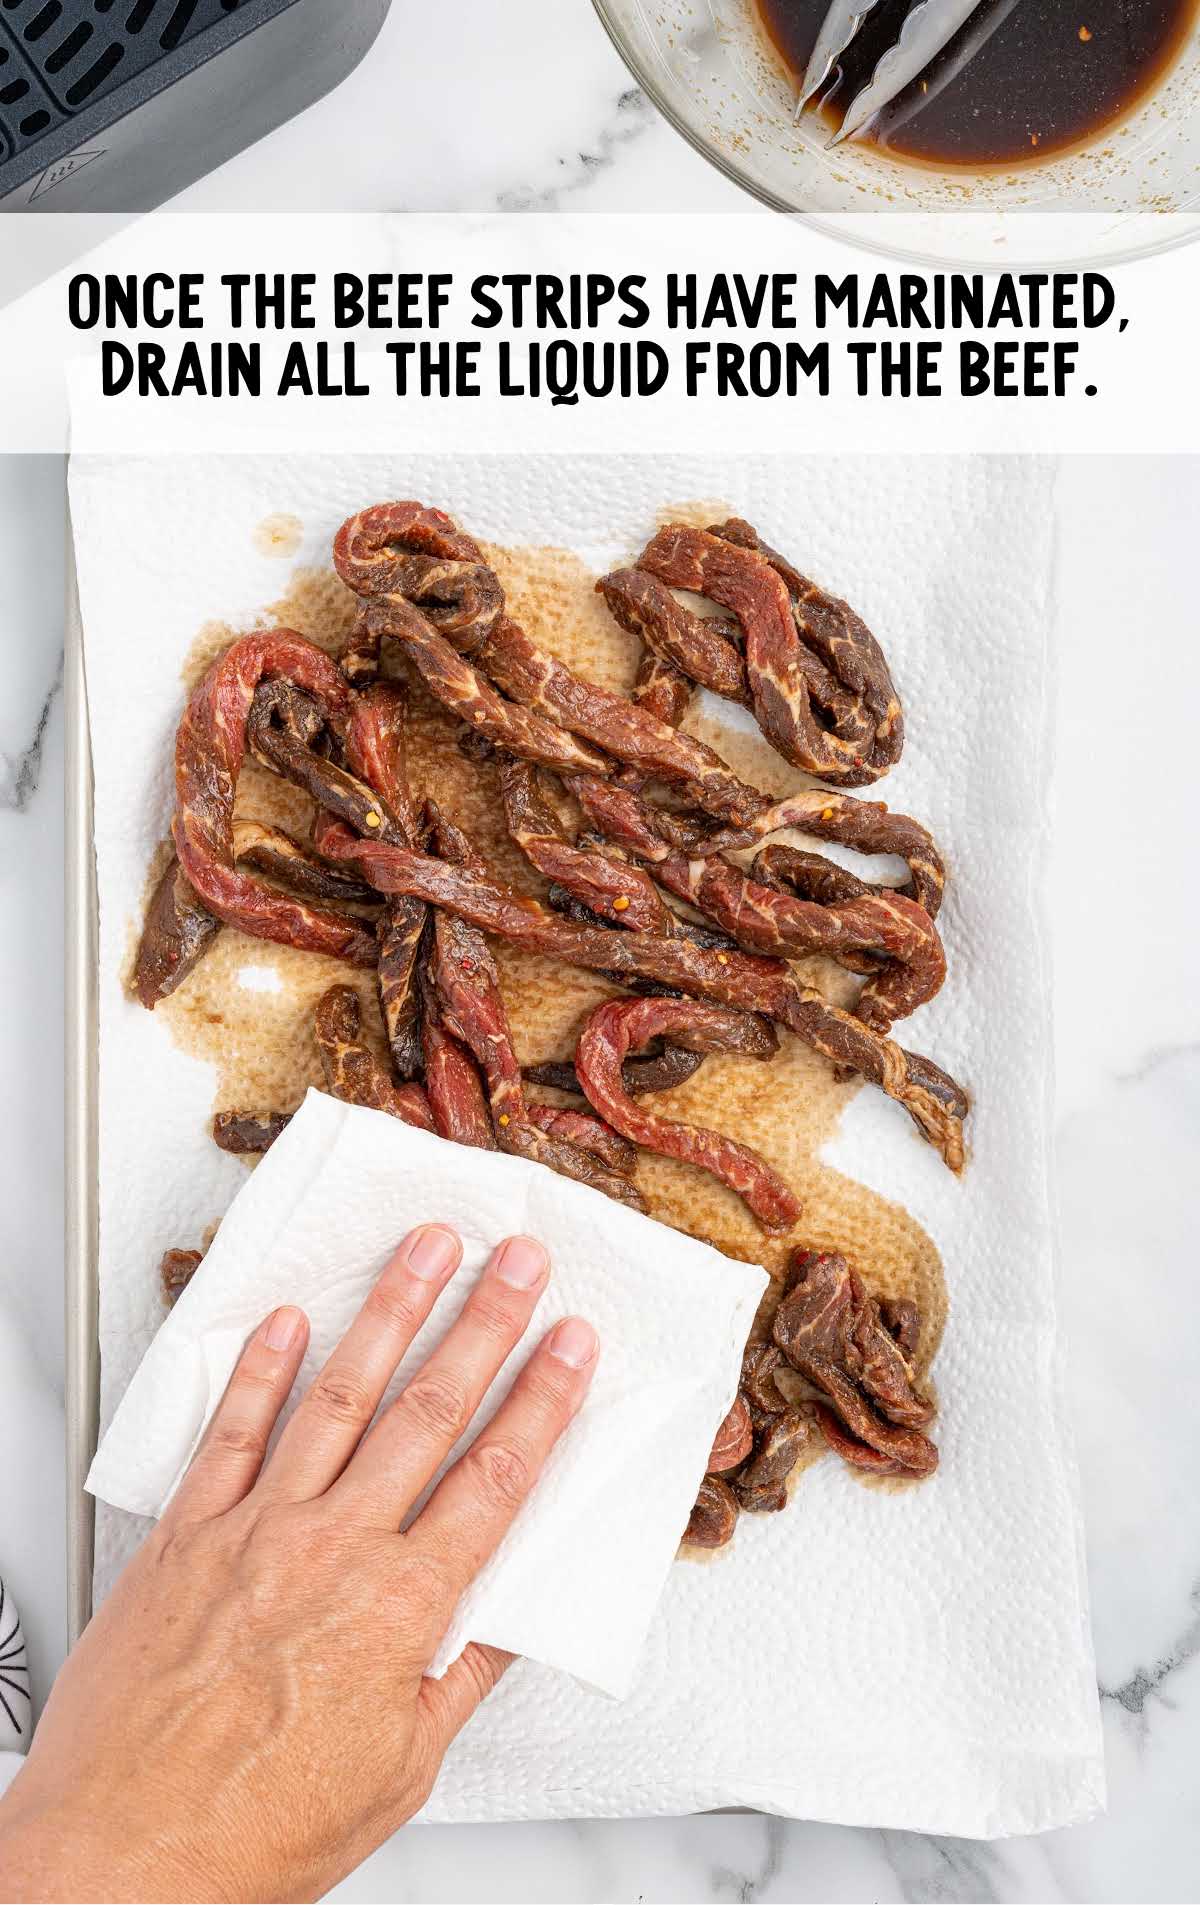 drain liquid from the beef